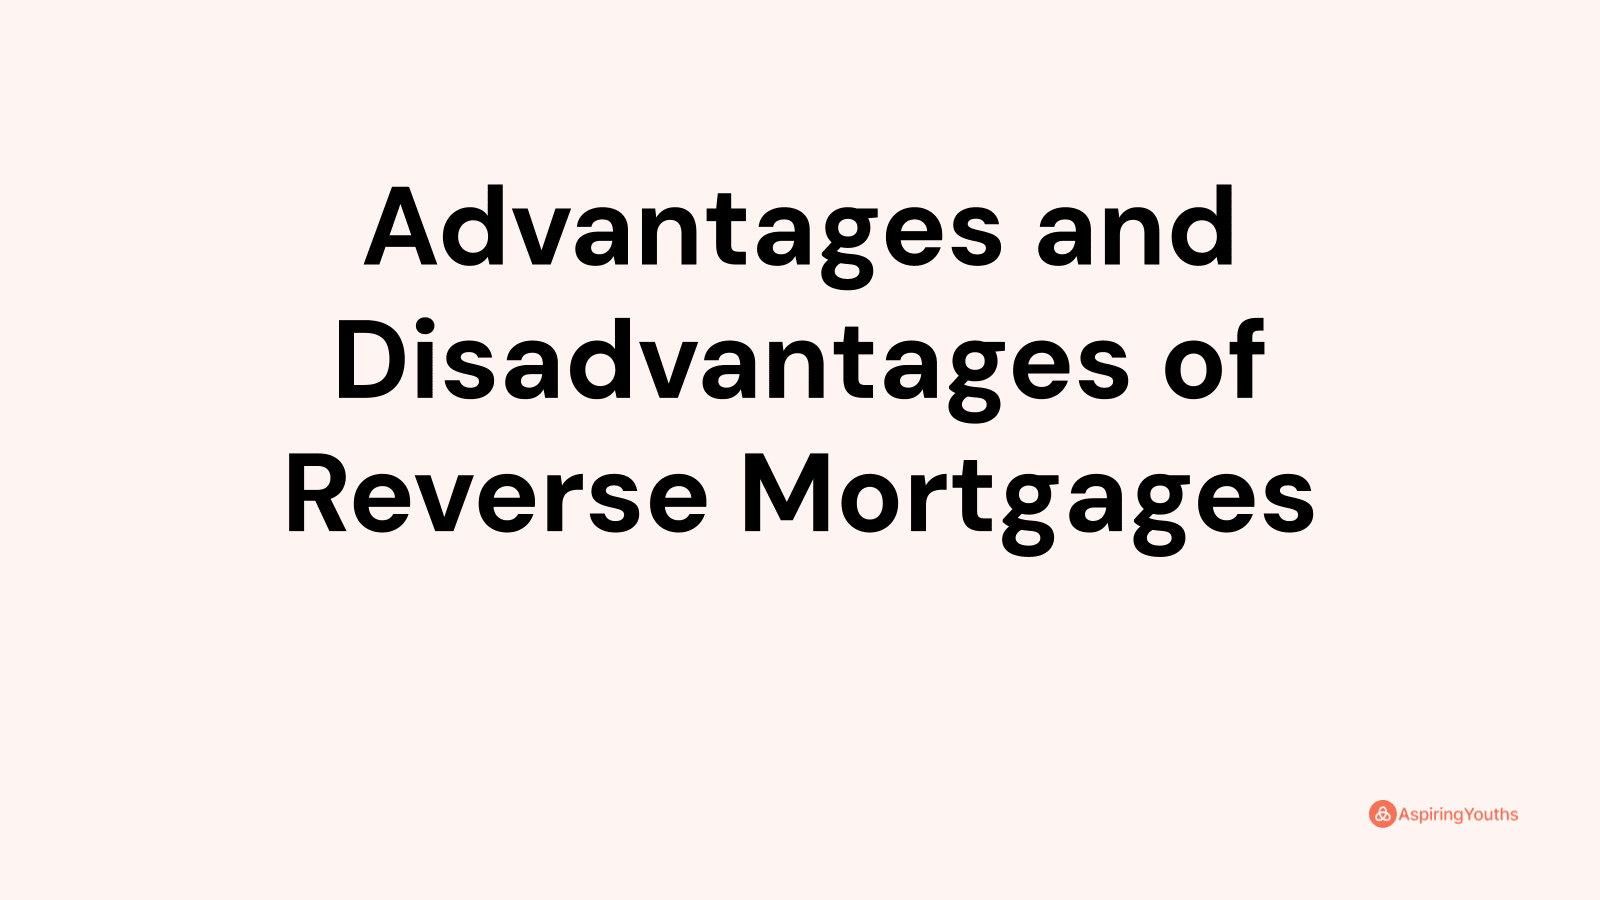 Advantages and disadvantages of Reverse Mortgages